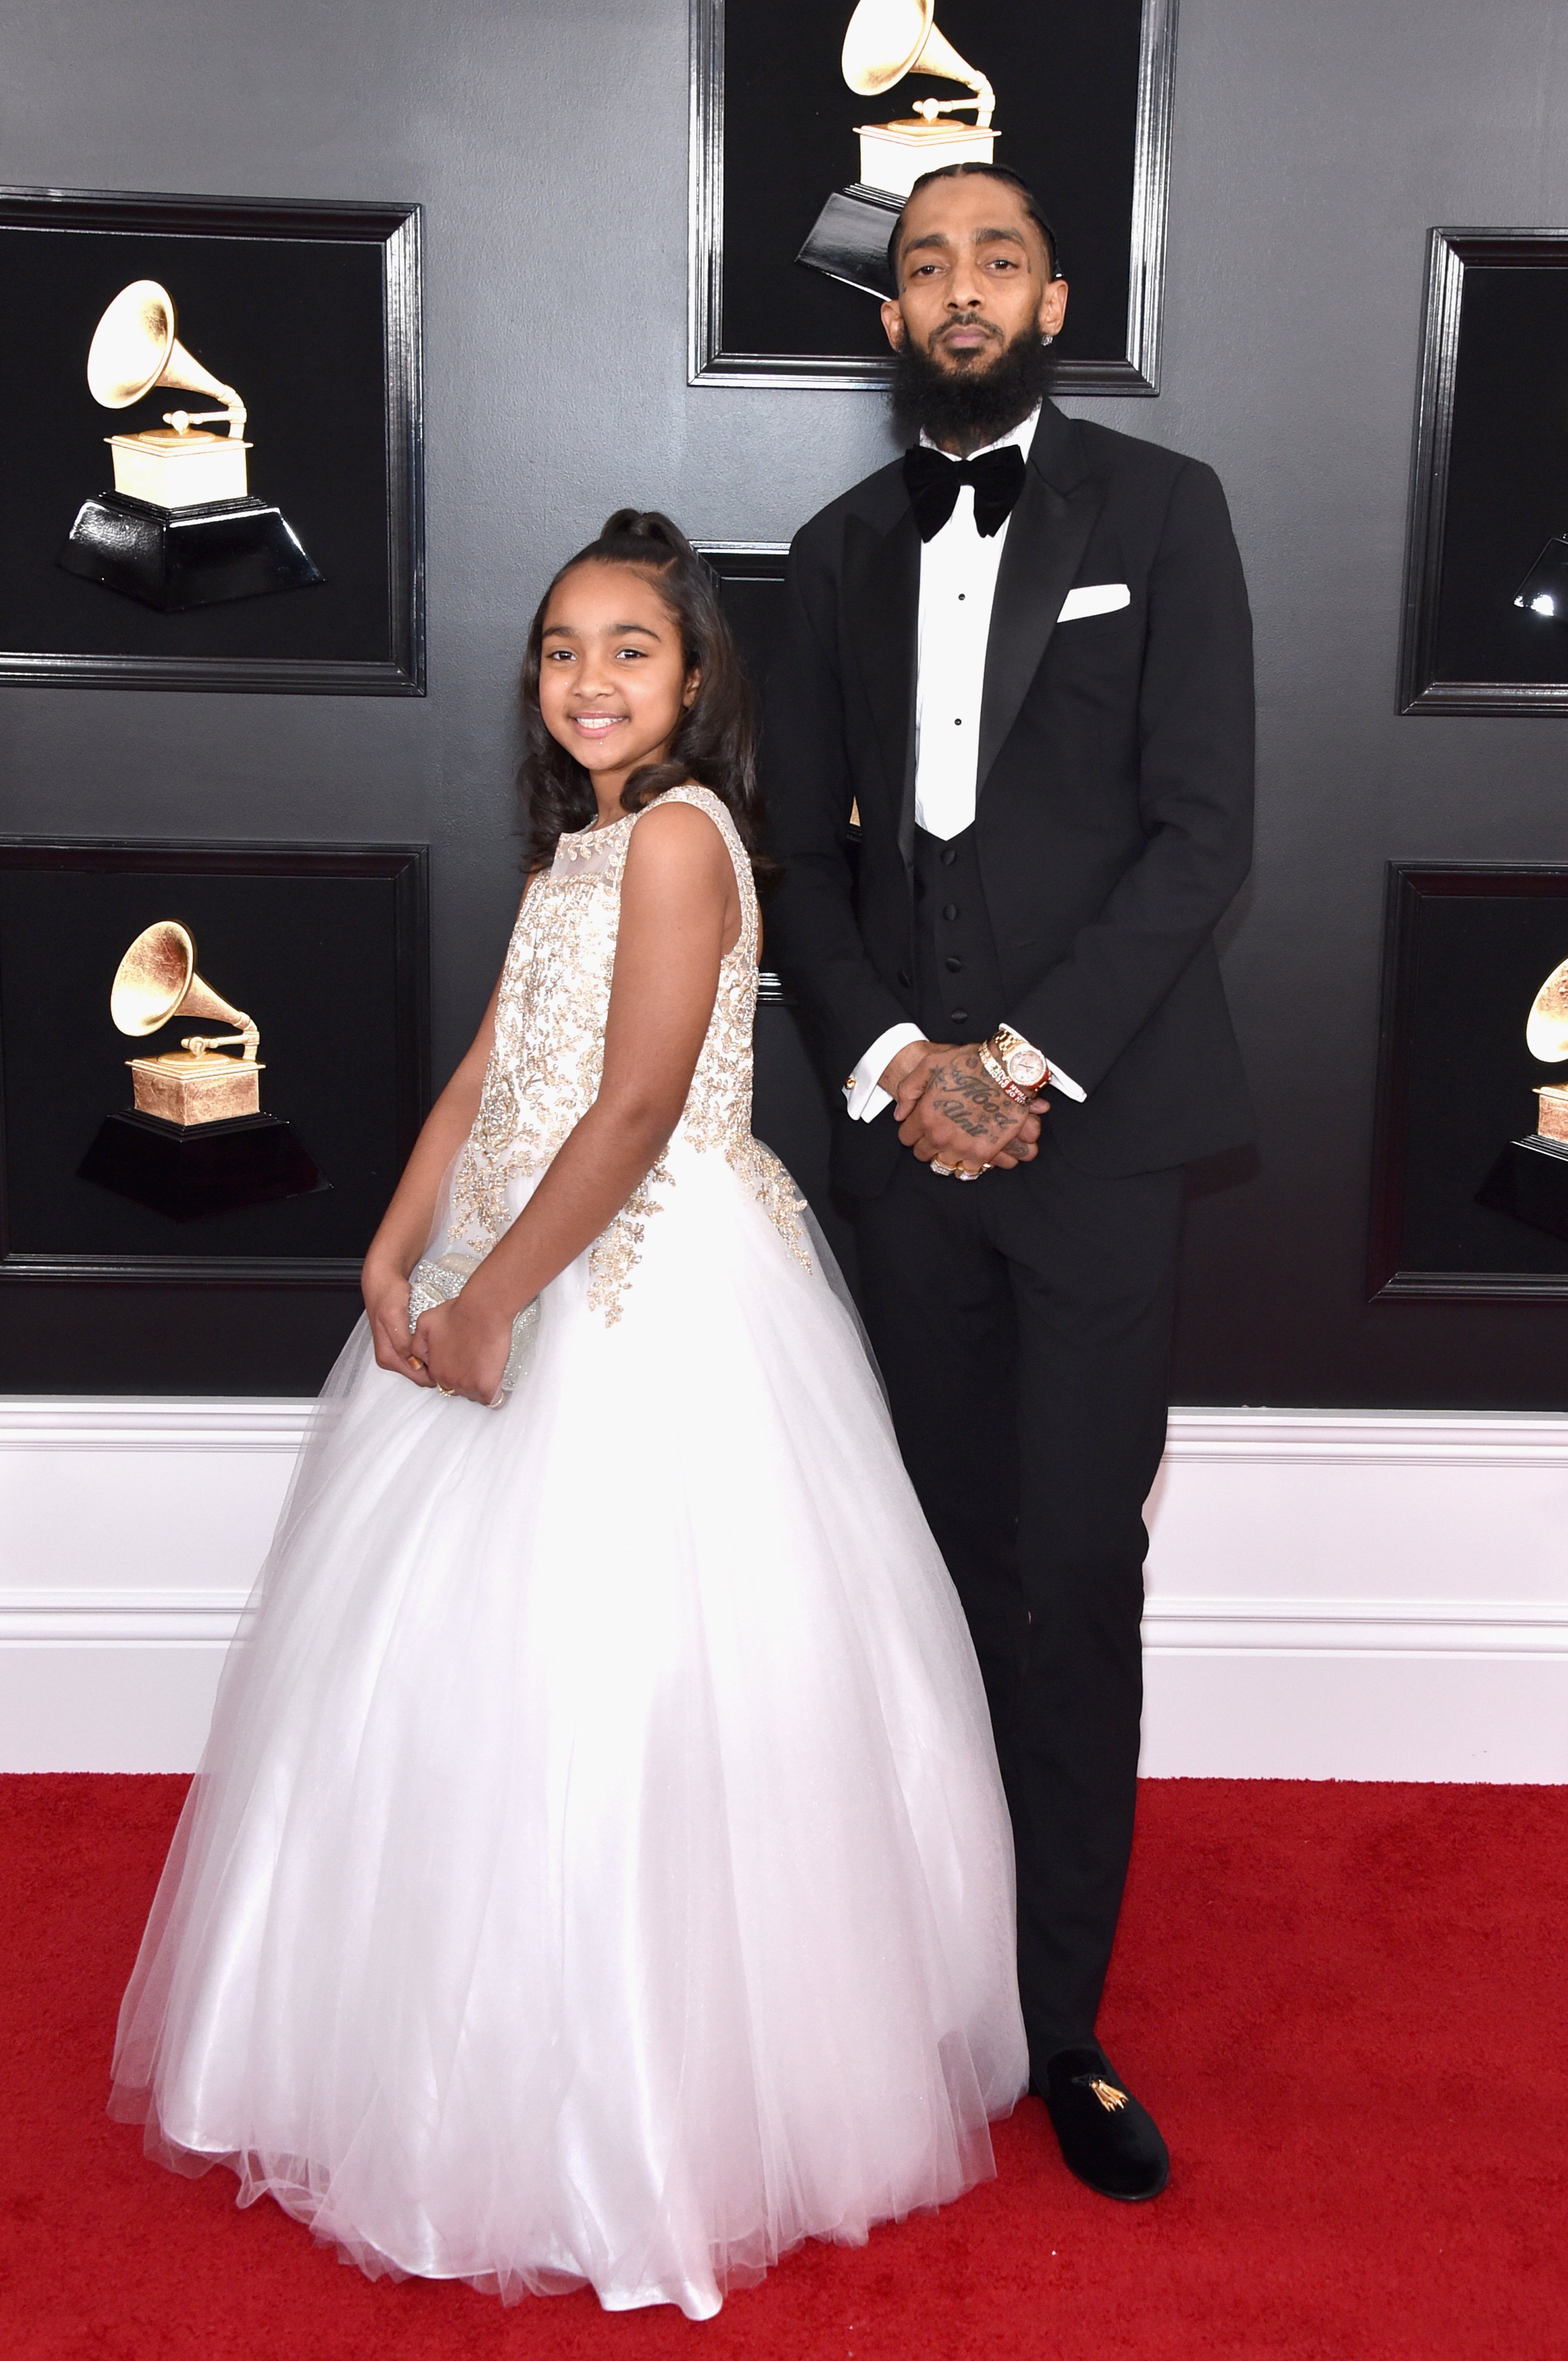 Nipsey Hussle & daughter Emani at the GRAMMY Awards on Feb. 10, 2019 in California | Photo: Getty Images